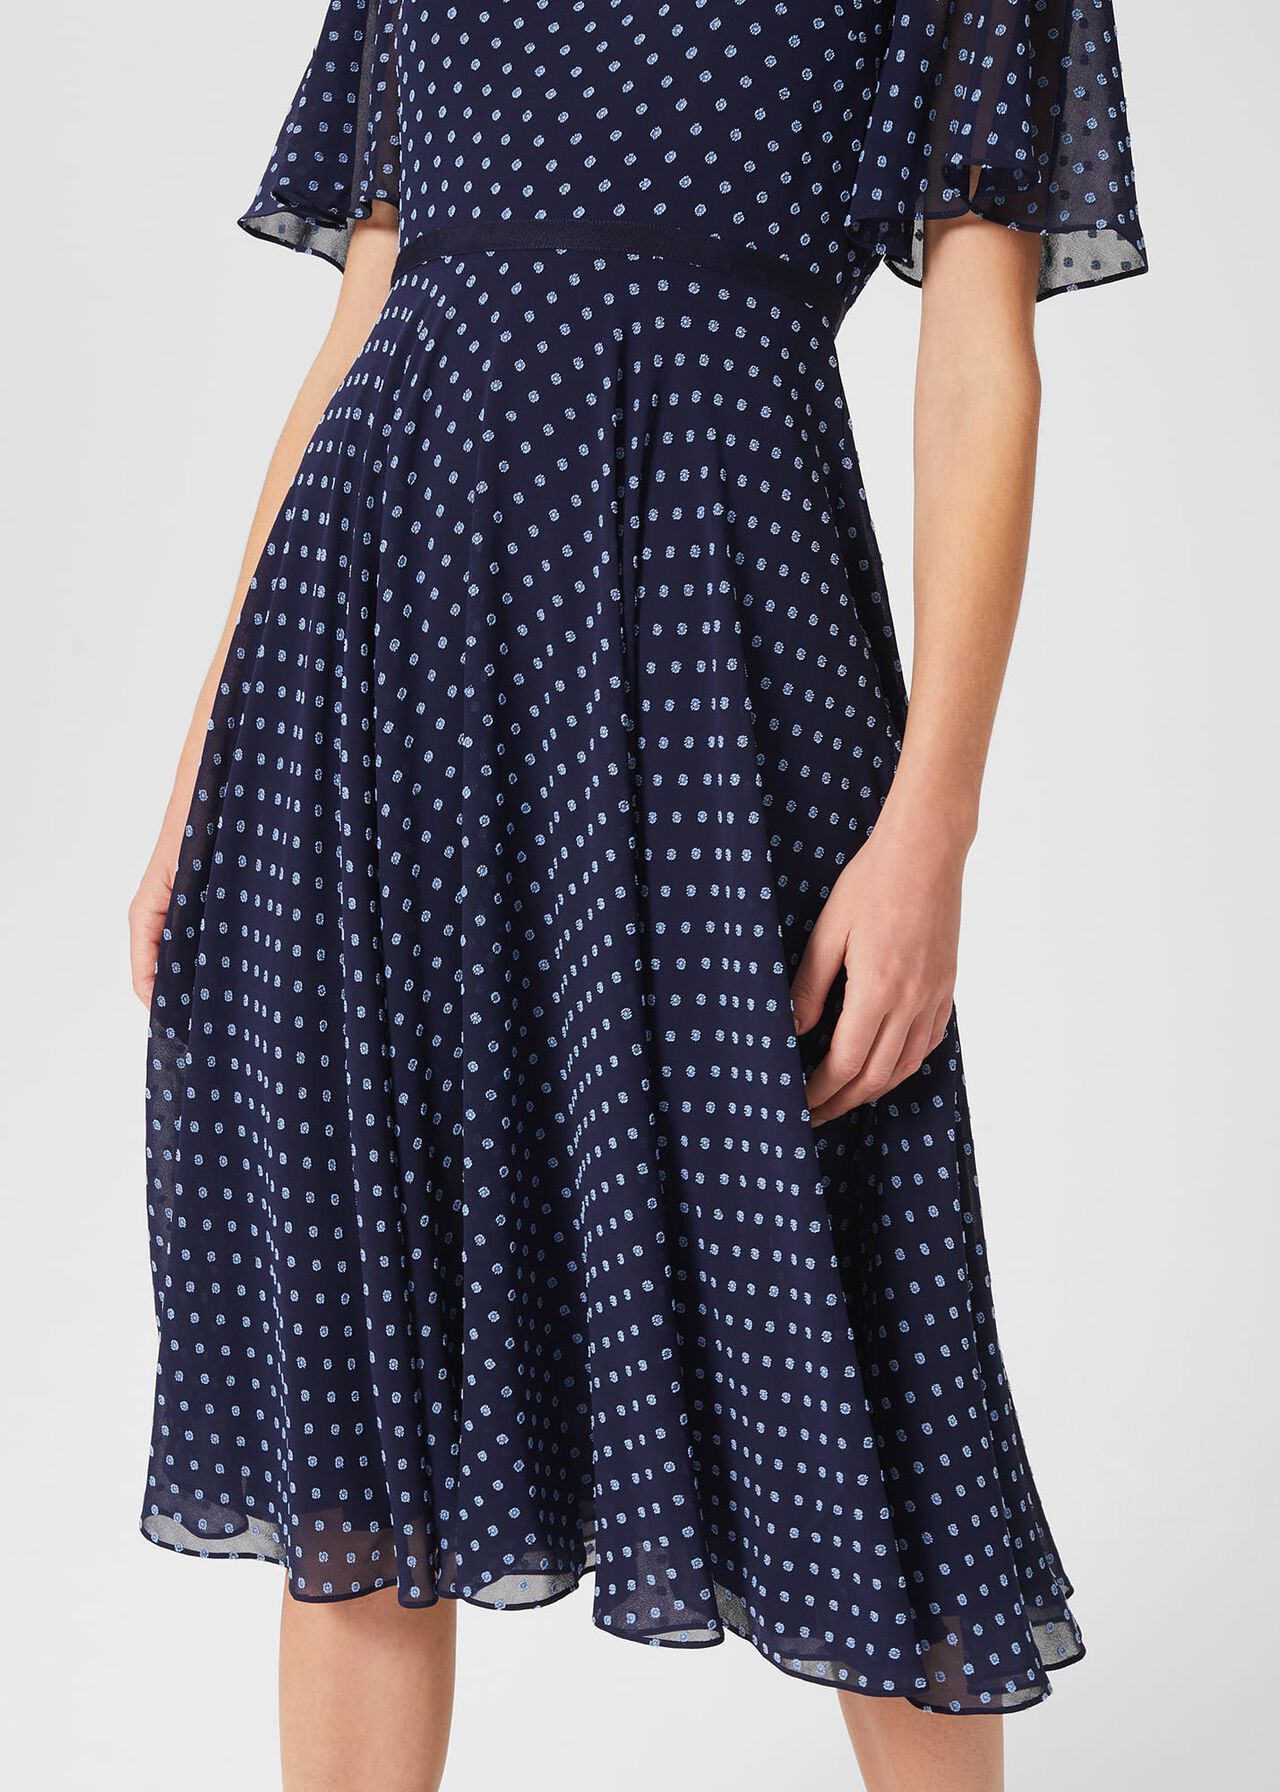 Petite Eleanor Fit And Flare Dress, Midnight Blue, hi-res